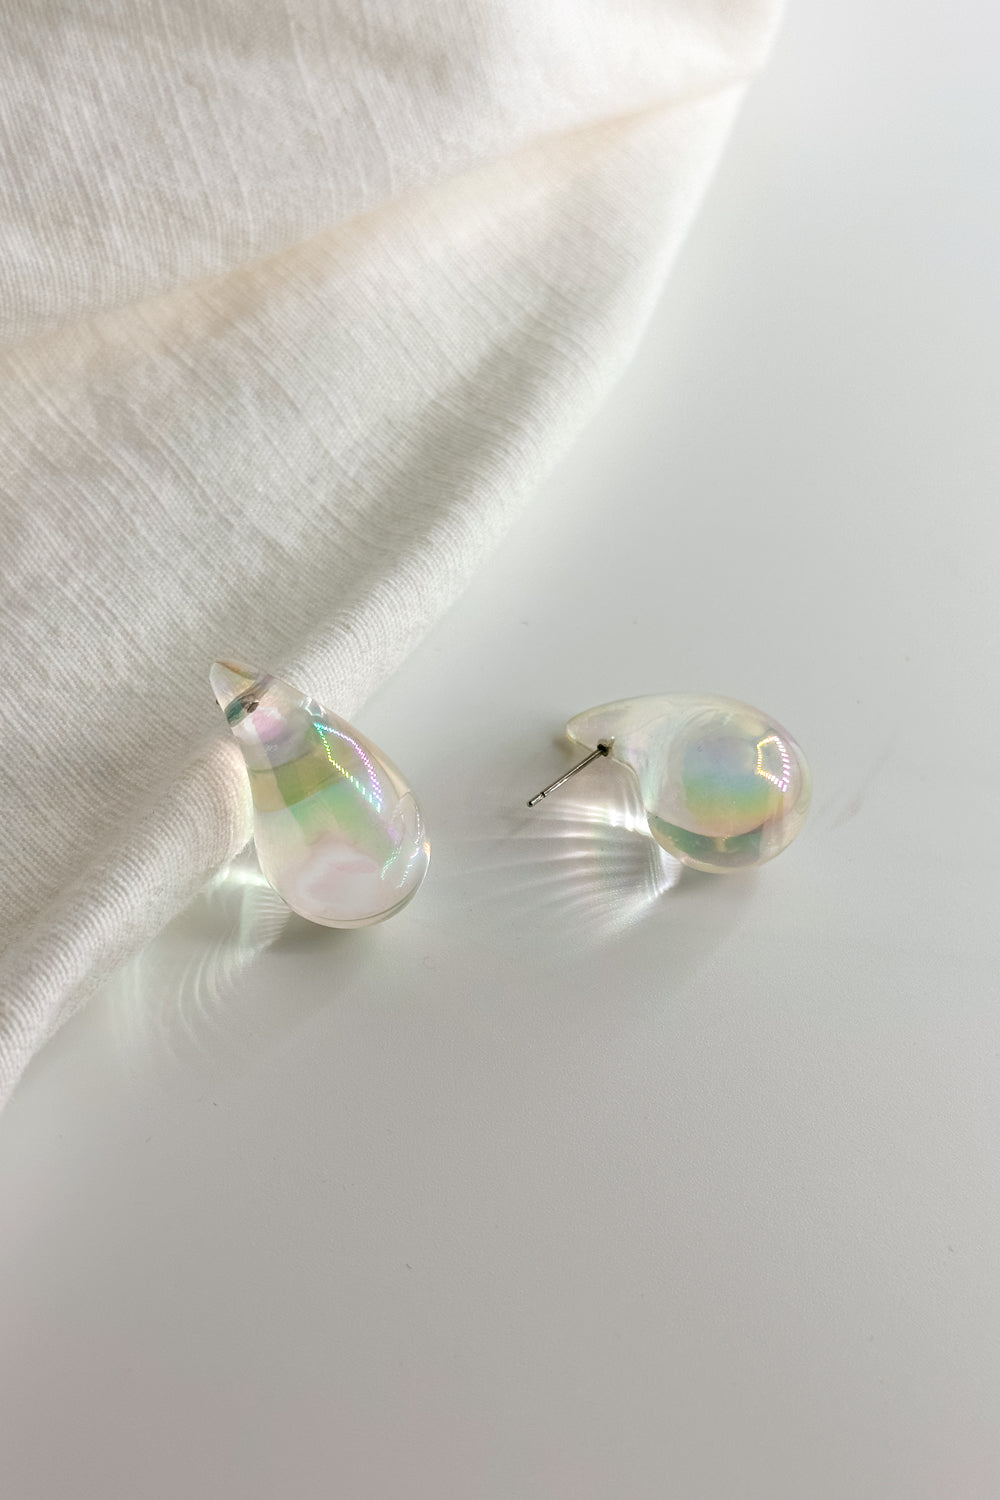 Flat lay view of the Mila Iridescent Scoop Teardrop Stud Earring which features iridescent teardrop studs